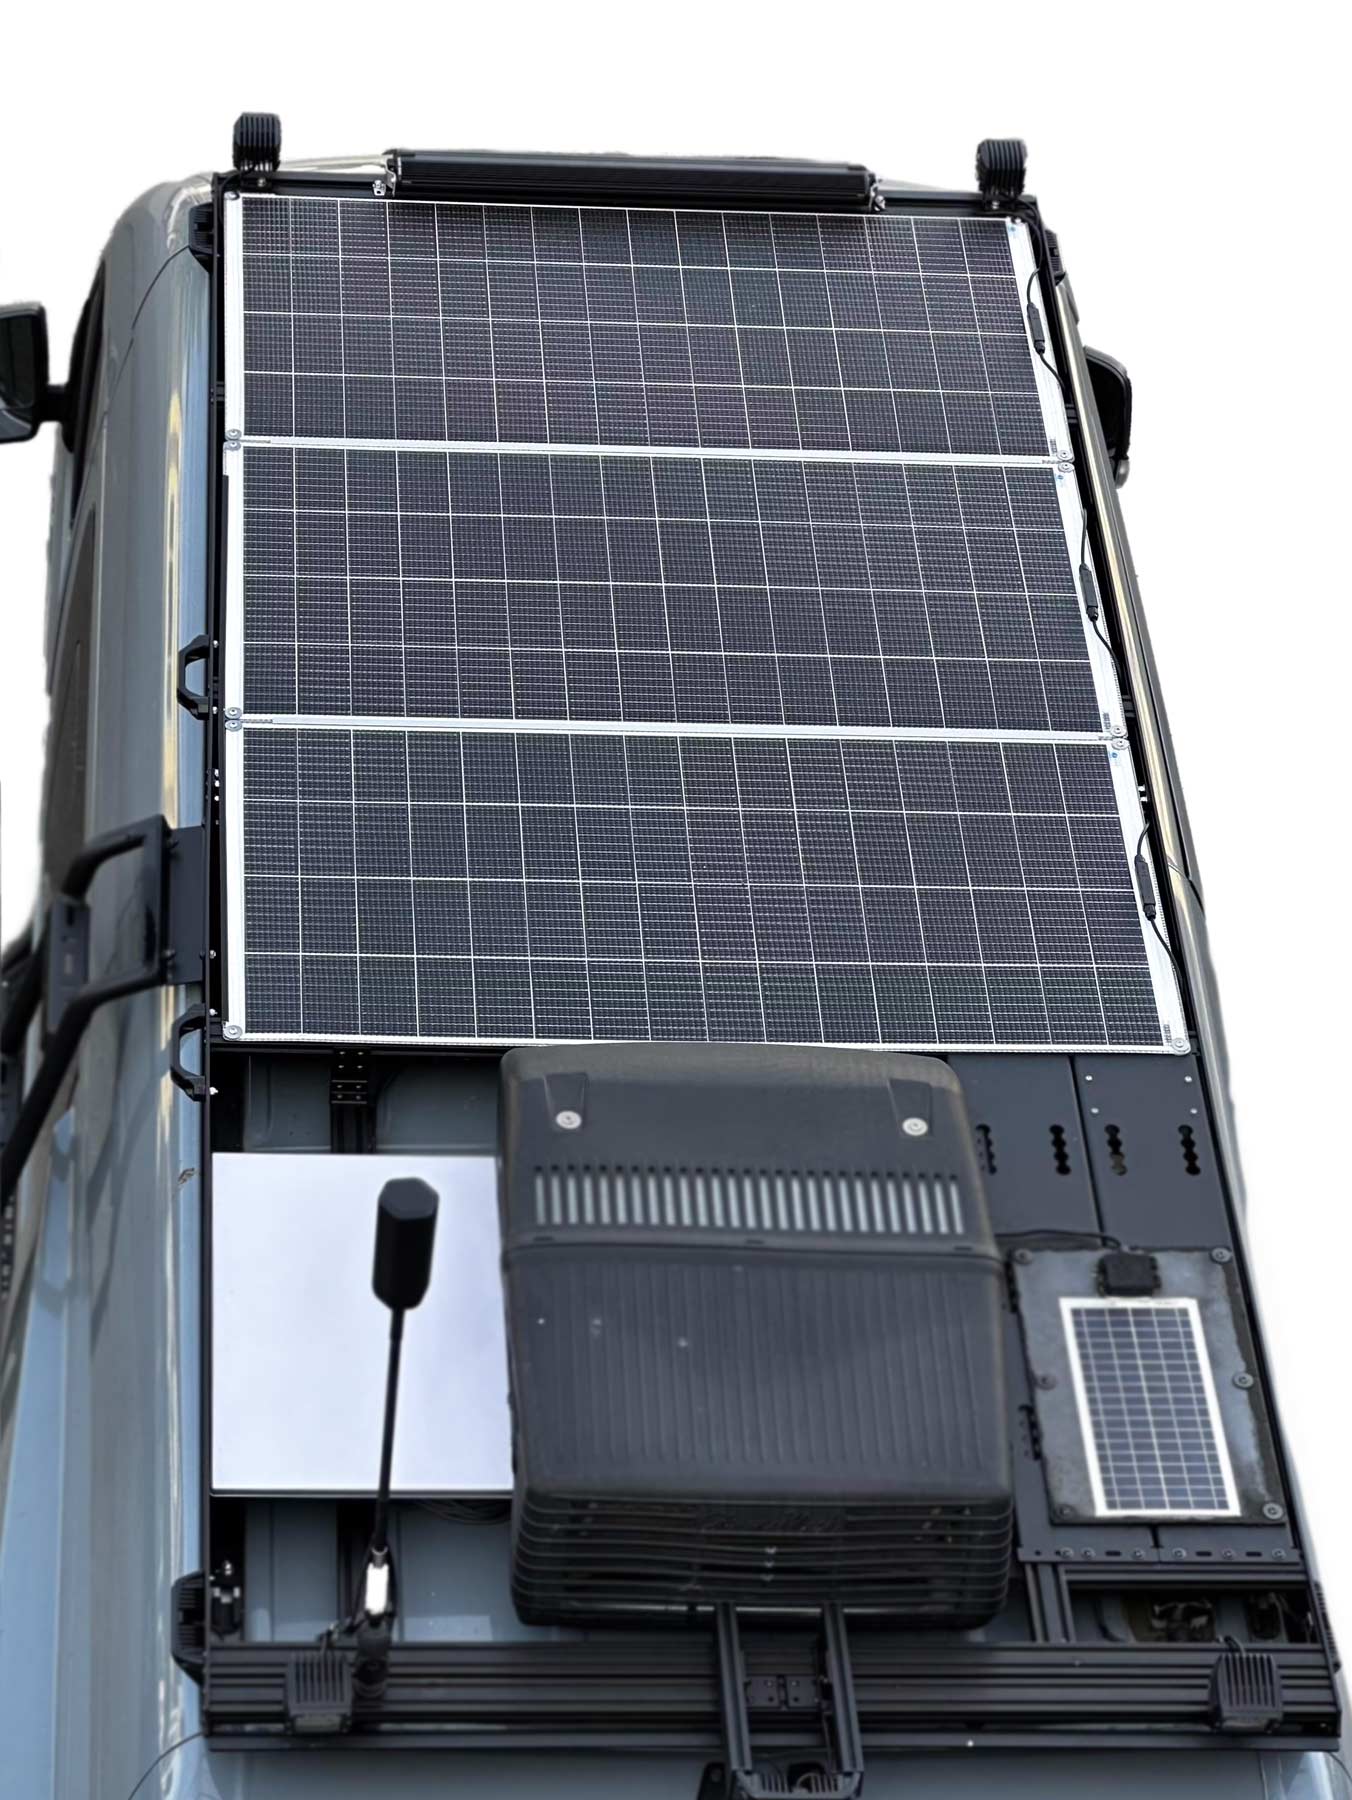 three 175 watt walkable solar panels with 2 H channel rails between them in preferred mounting setup 